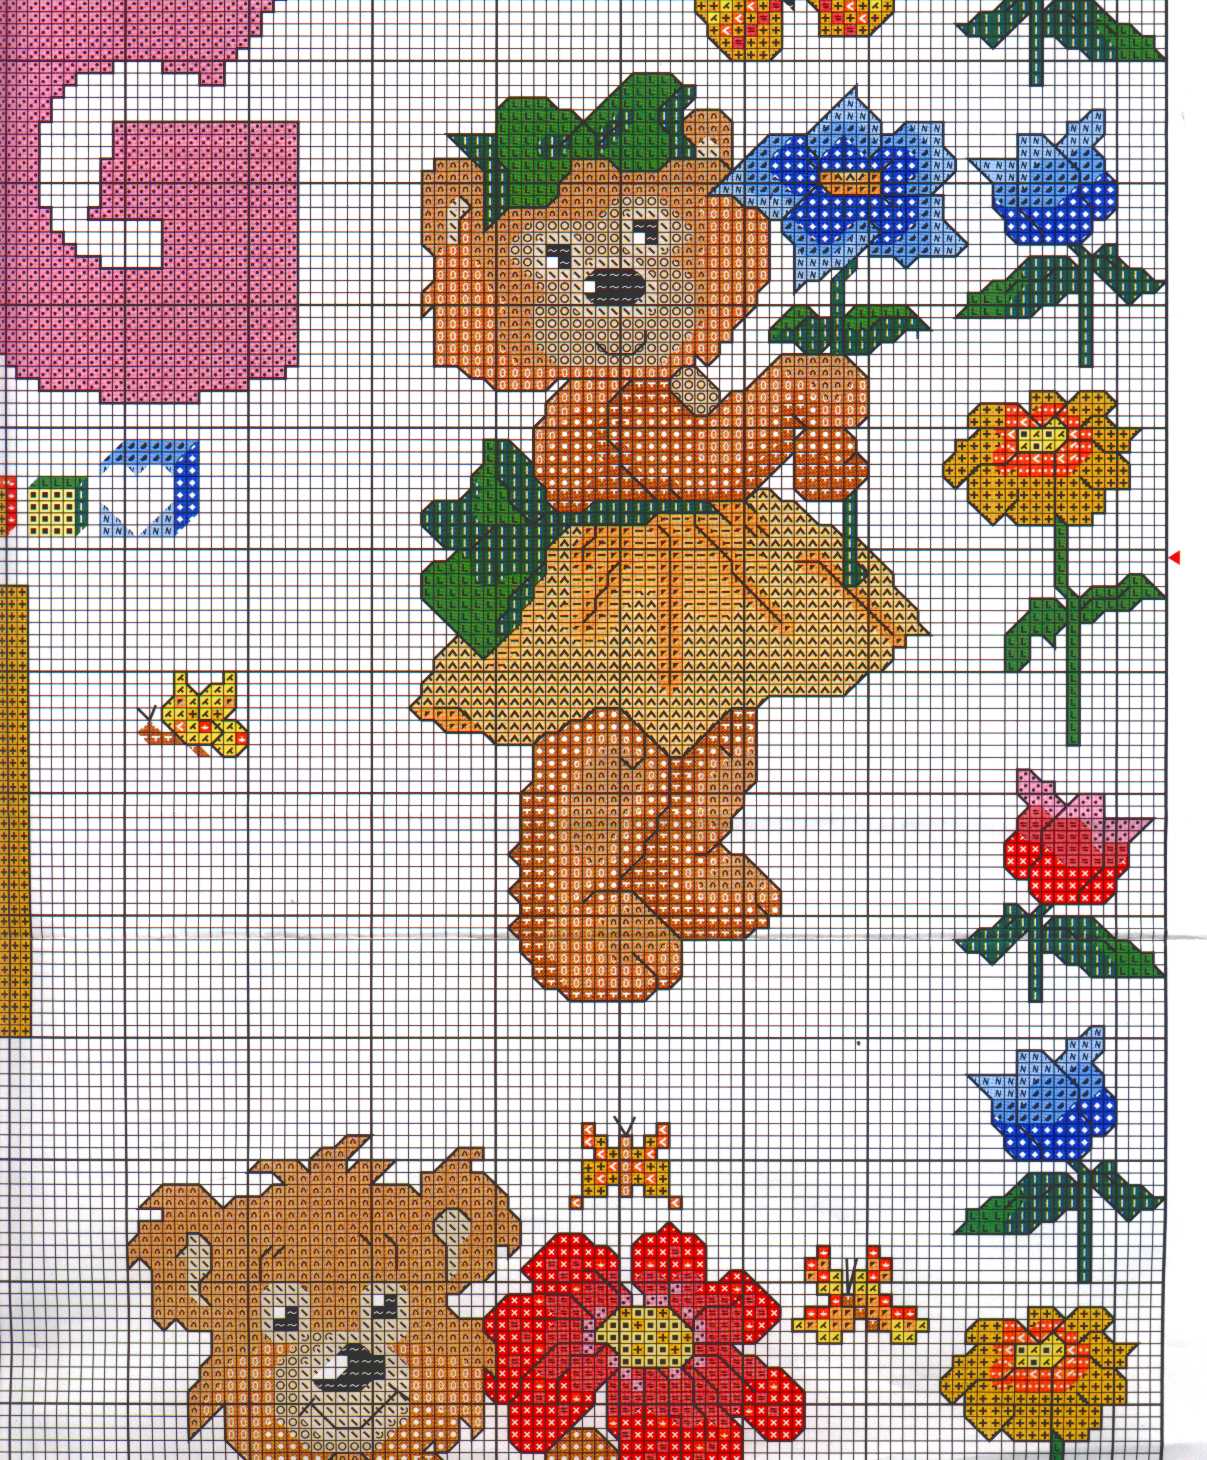 Sampler with teddy bears with letters from A to I (7)